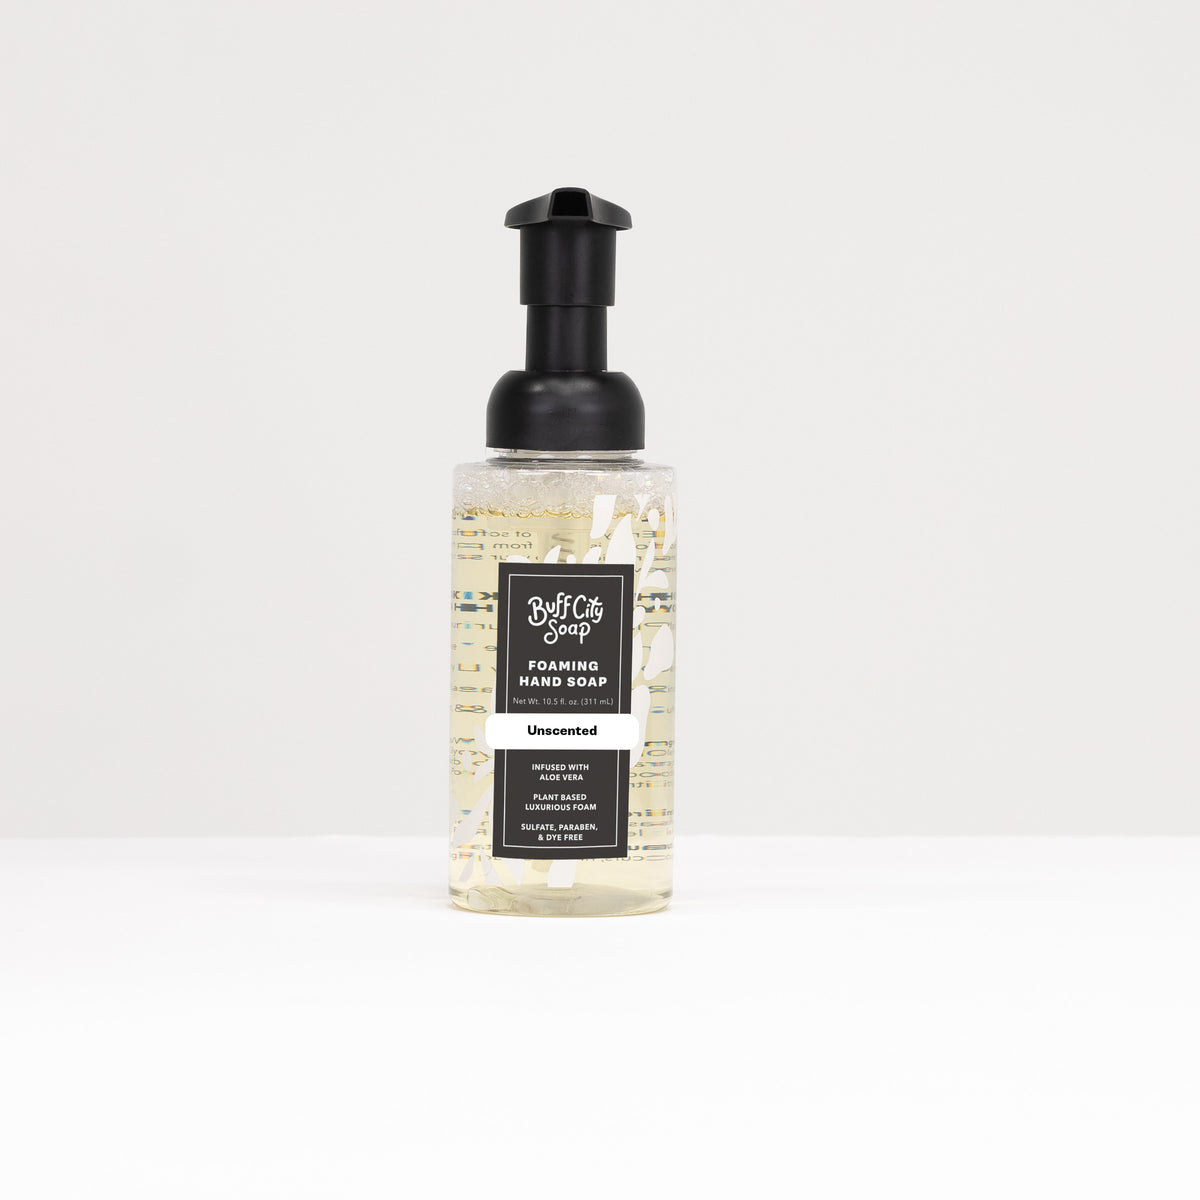 Unscented Foaming Hand Soap